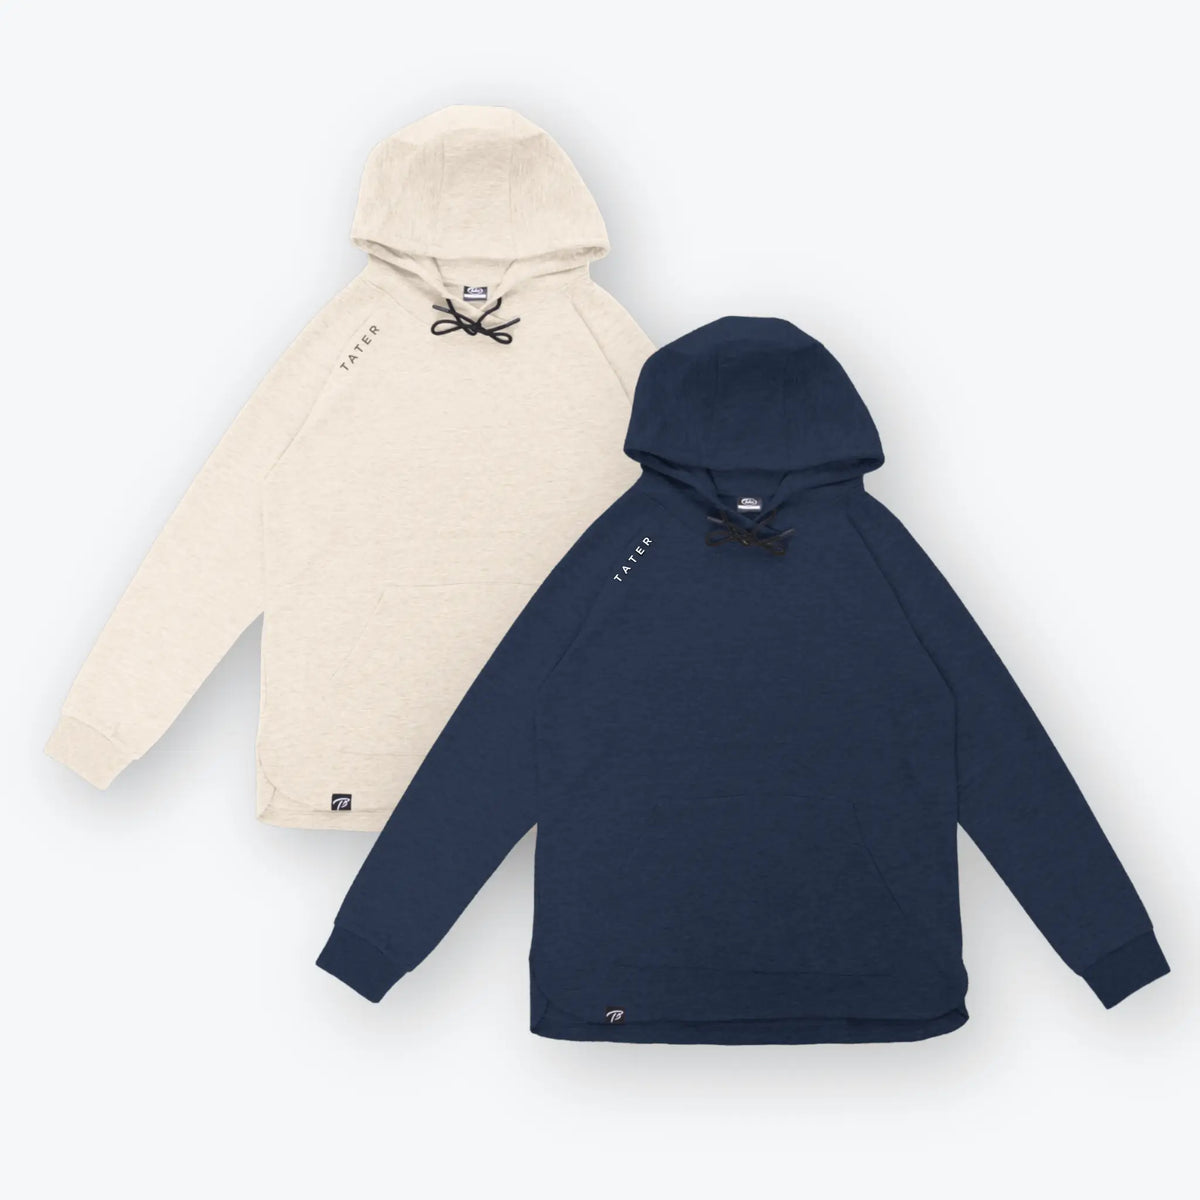 The image features two hoodies from Tater Baseball&#39;s Fundamentals collection. One hoodie is cream-colored, and the other is navy, both sporting the &quot;TATER&quot; logo on the left chest area. They present a minimalistic and clean design, suitable for a casual, athletic look.